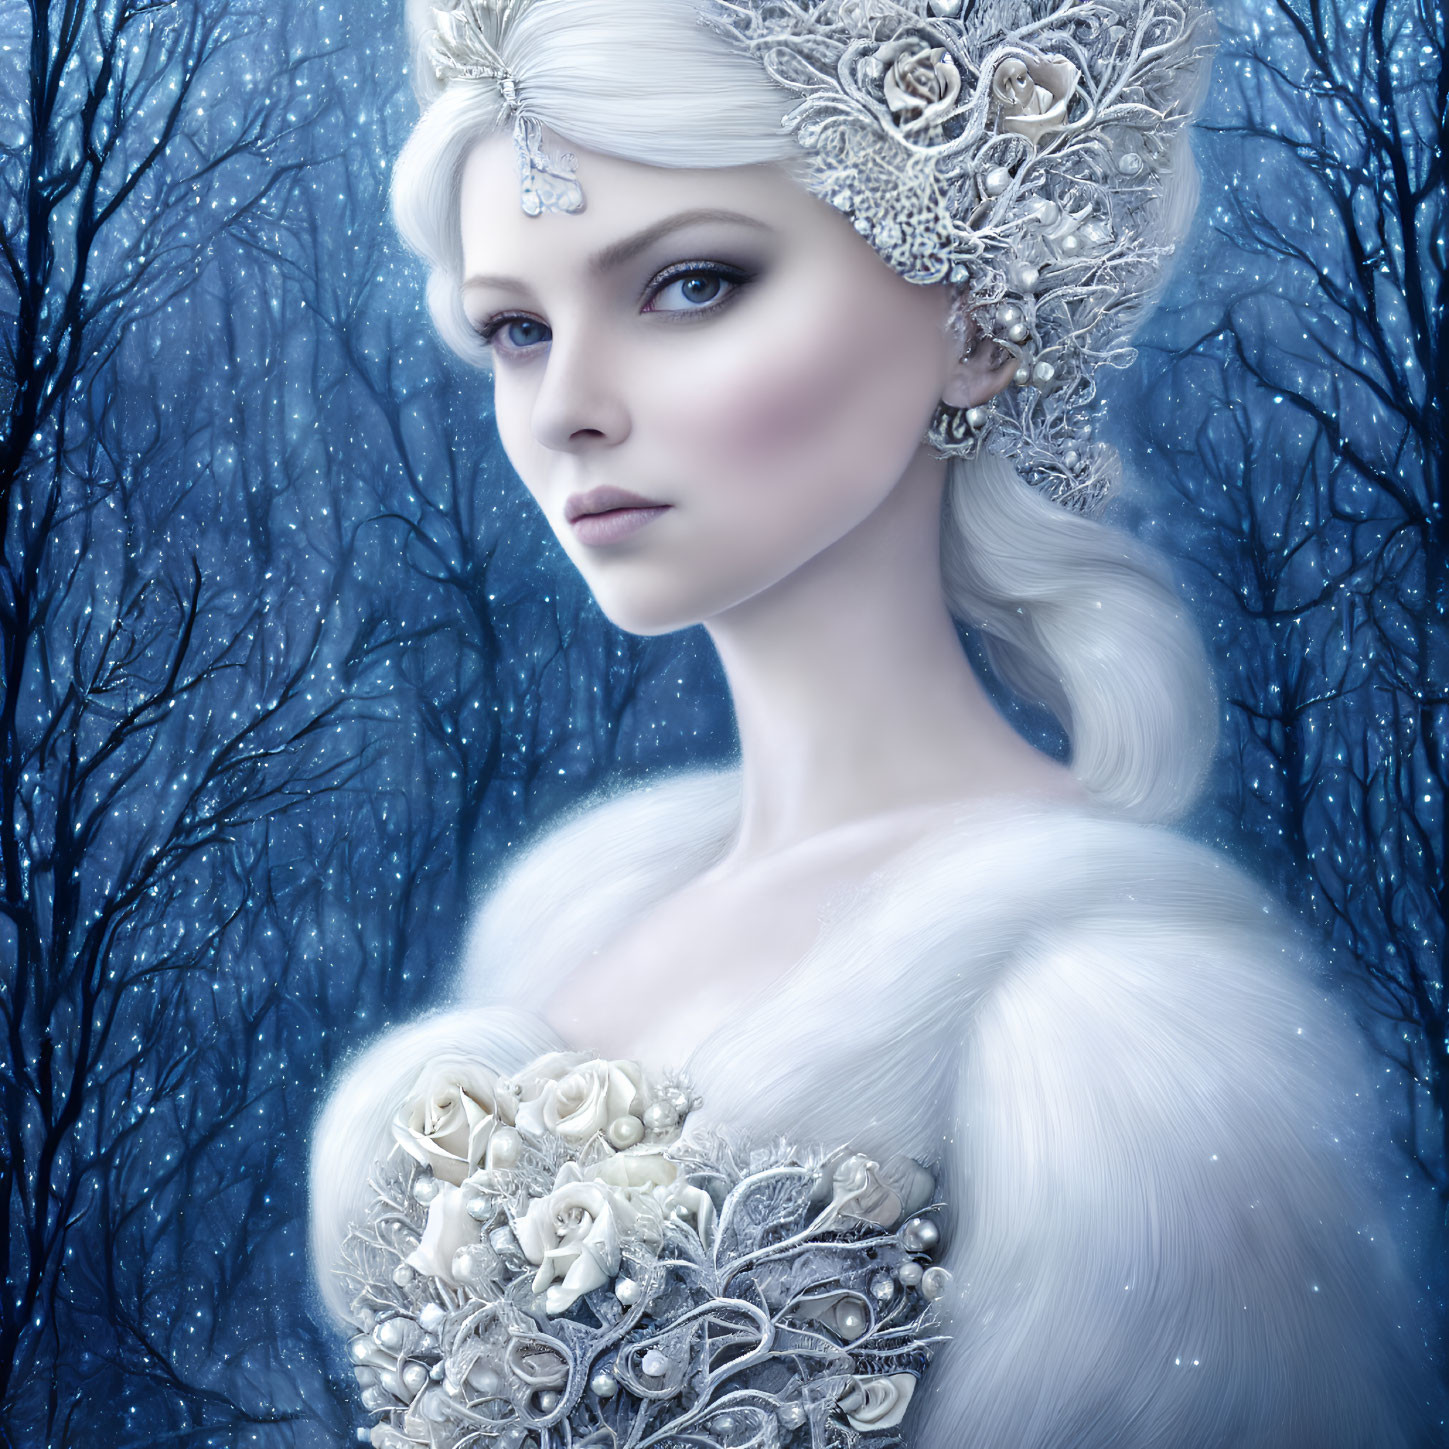 Pale-skinned woman with ice-blue eyes in silver headdress and floral gown against wintry tree backdrop